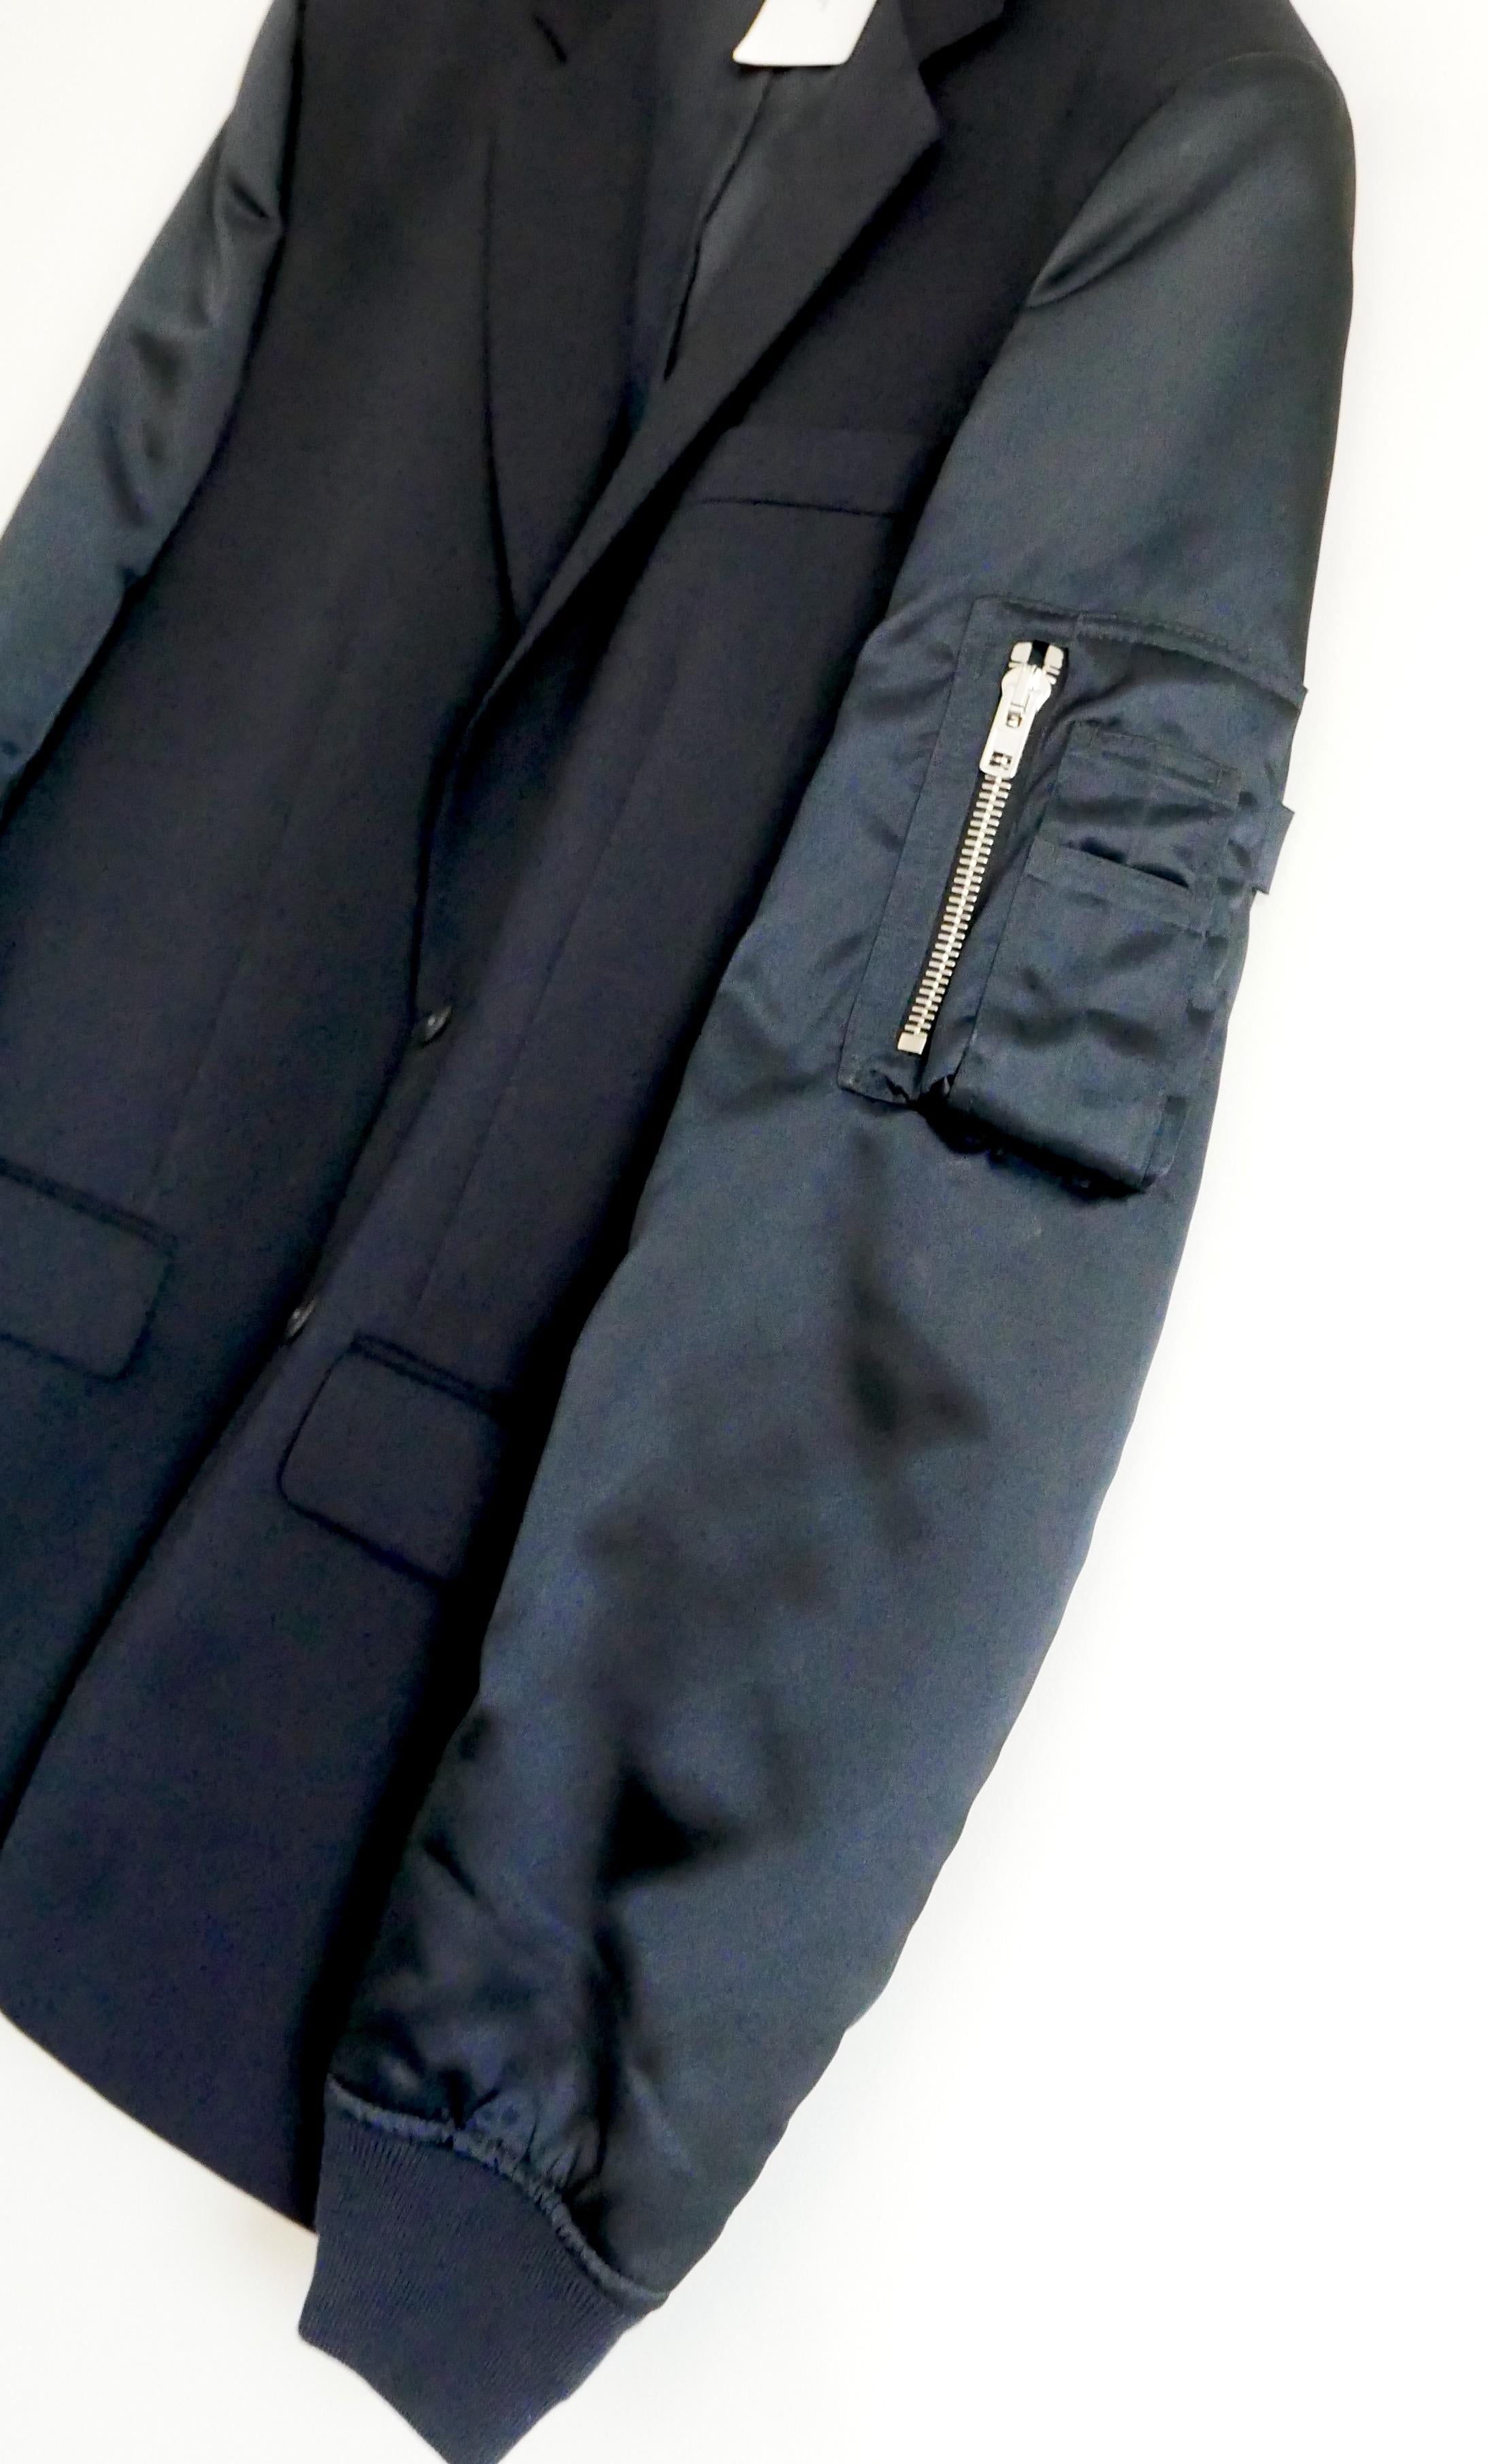 Super cool blazer meets bomber jacket from Givenchy. bought for £2950 and unworn with all tags. 
Has a classic smooth navy wool tailored blazer body with lined button fastening, strong shoulders, 3 buttons and signature cross
darting to back of